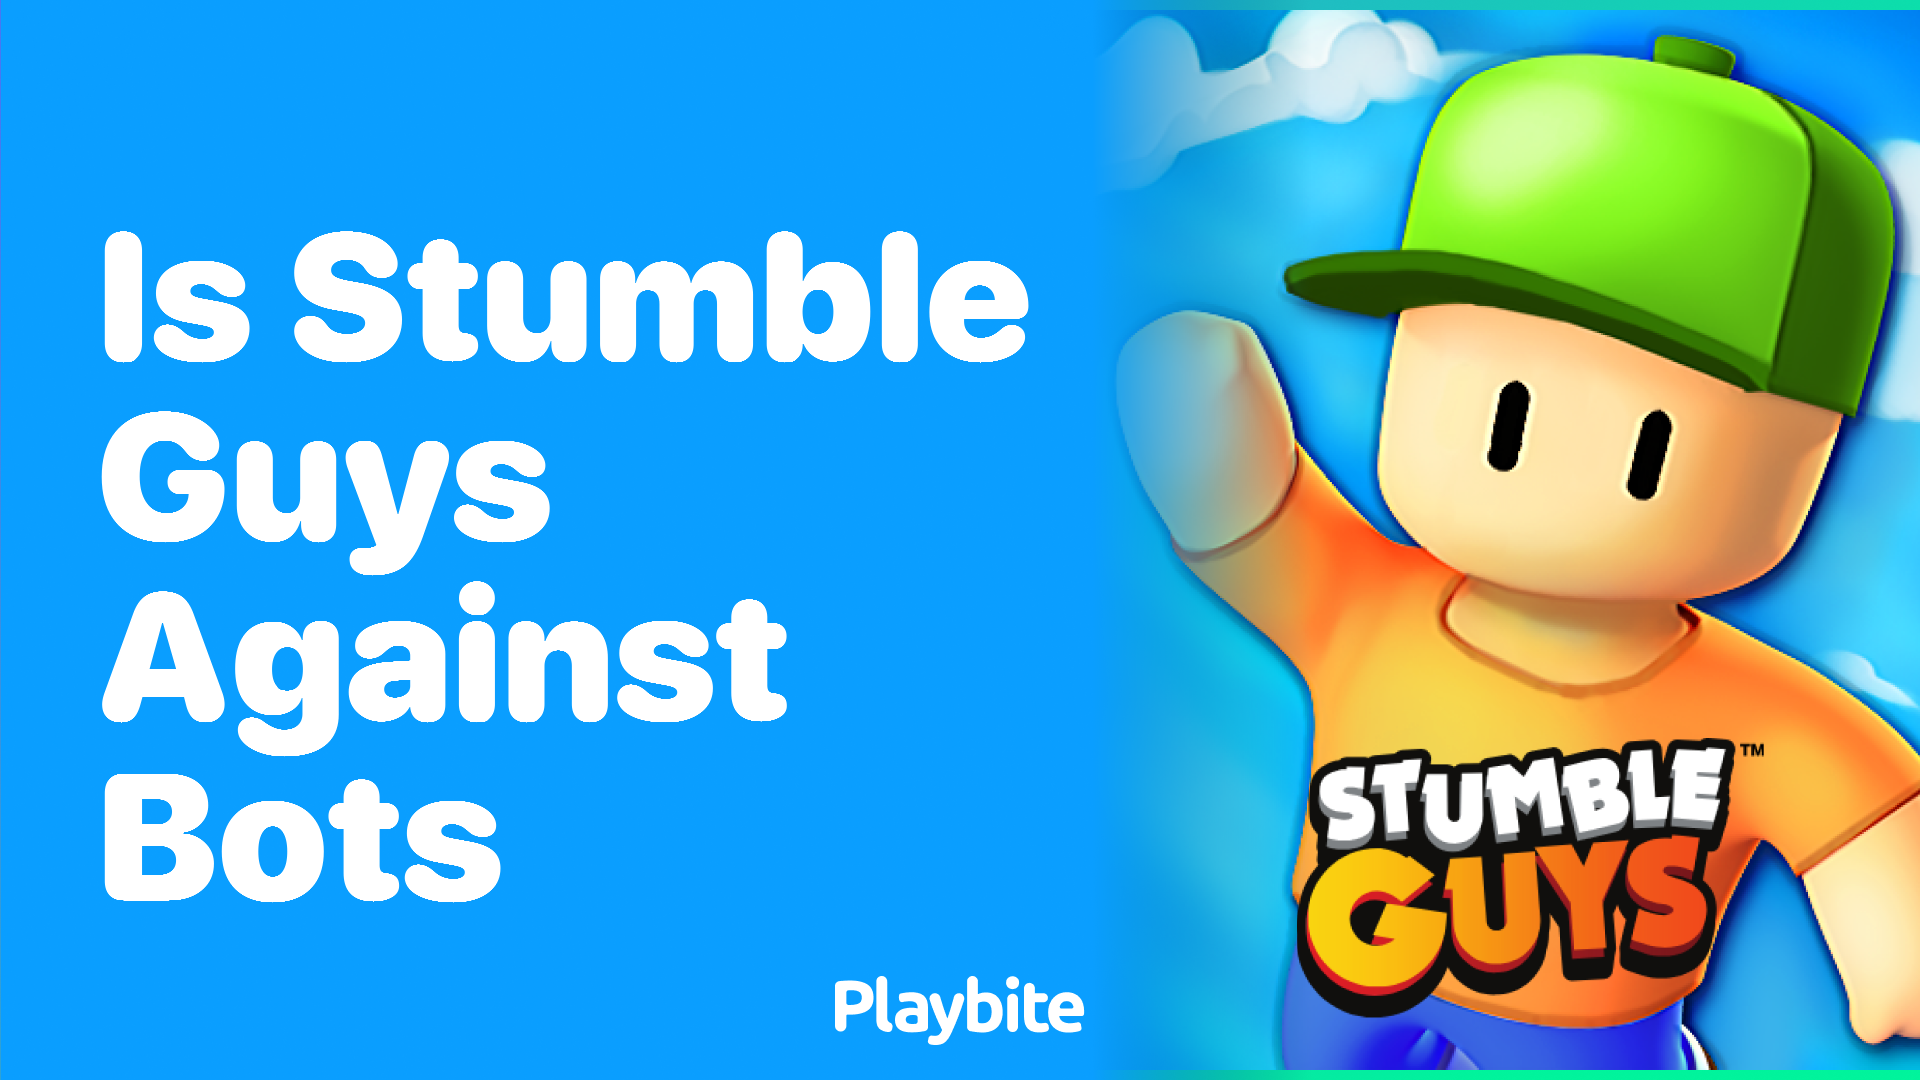 Is Stumble Guys Against Bots? Let&#8217;s Find Out!